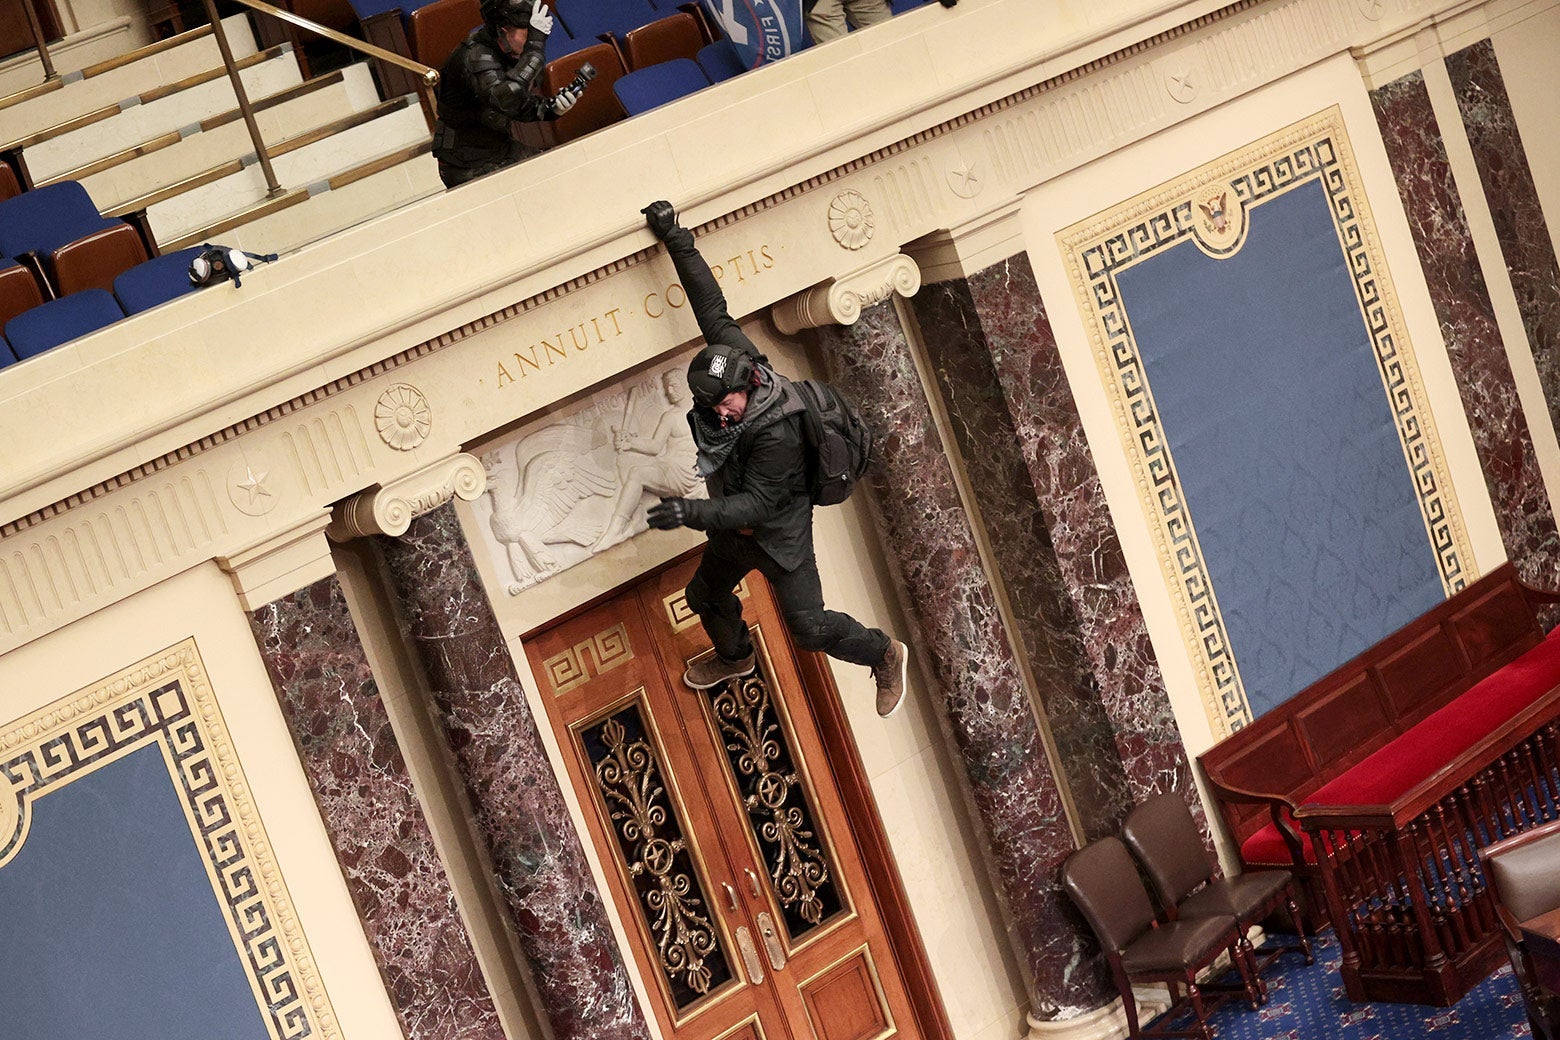 A man with a backpack swings from the Senate chamber's balcony. He is hanging on with one hand.